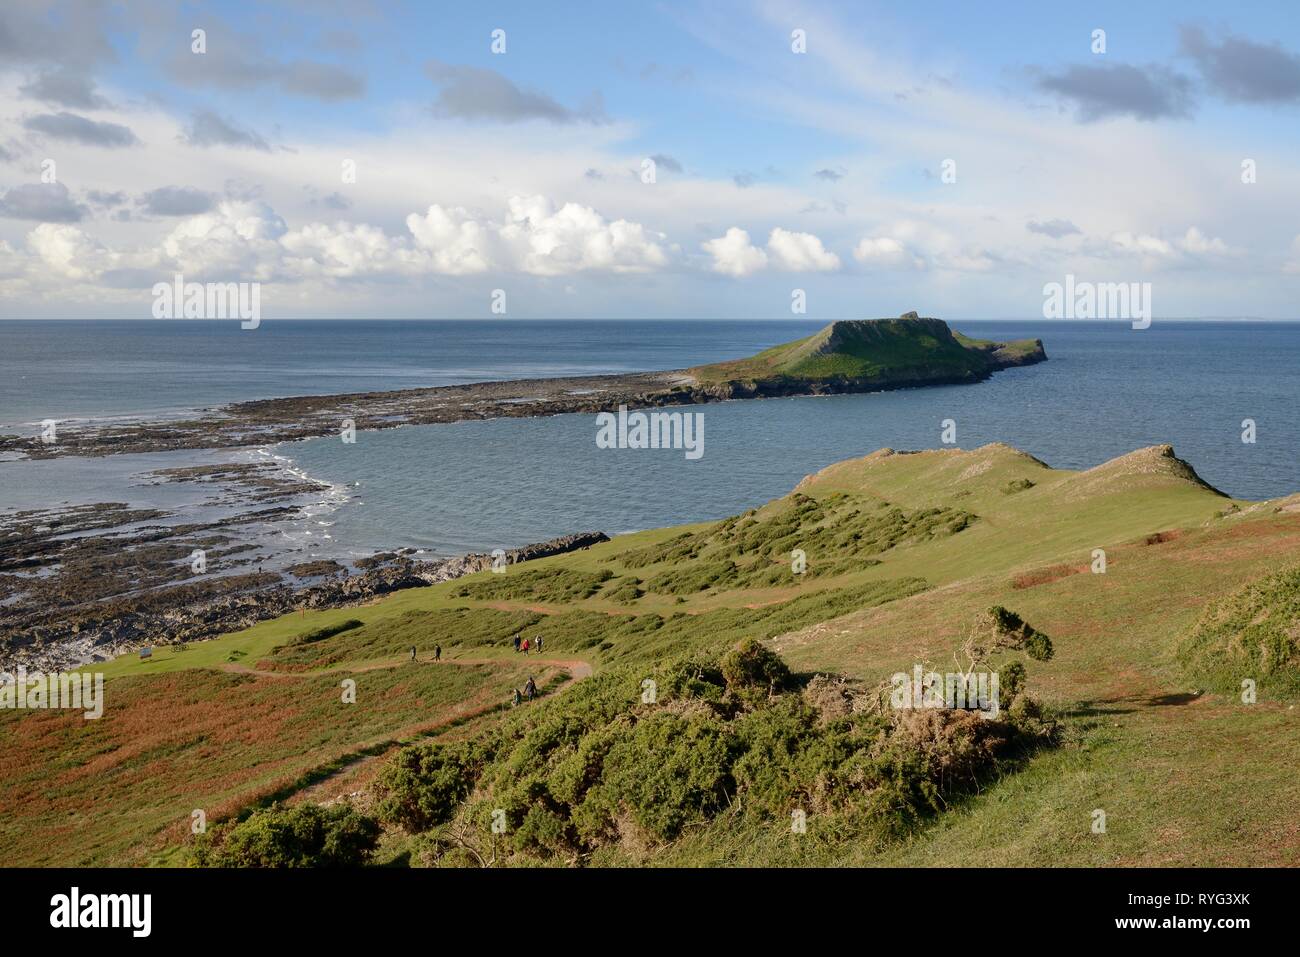 Overview of the Worm's head with a falling tide beginning to expose the tidal causeway that connects it to the mainland, Rhossili, The Gower peninsula Stock Photo